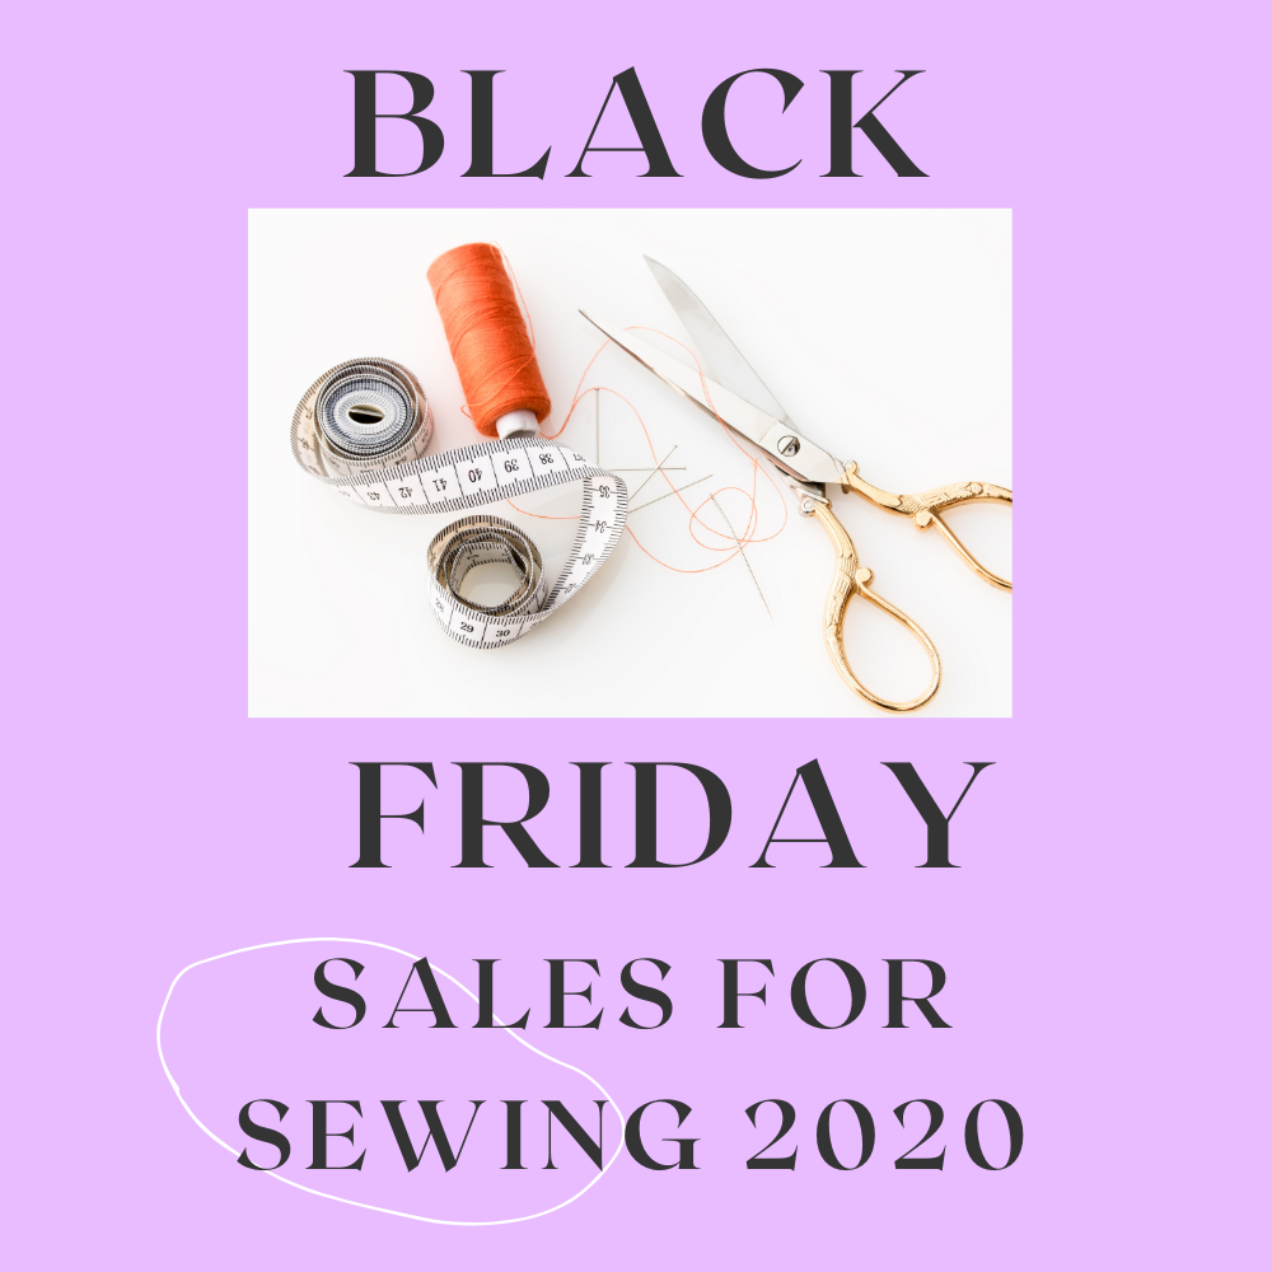 Sewing Sales for Black Friday through Cyber Monday 2020